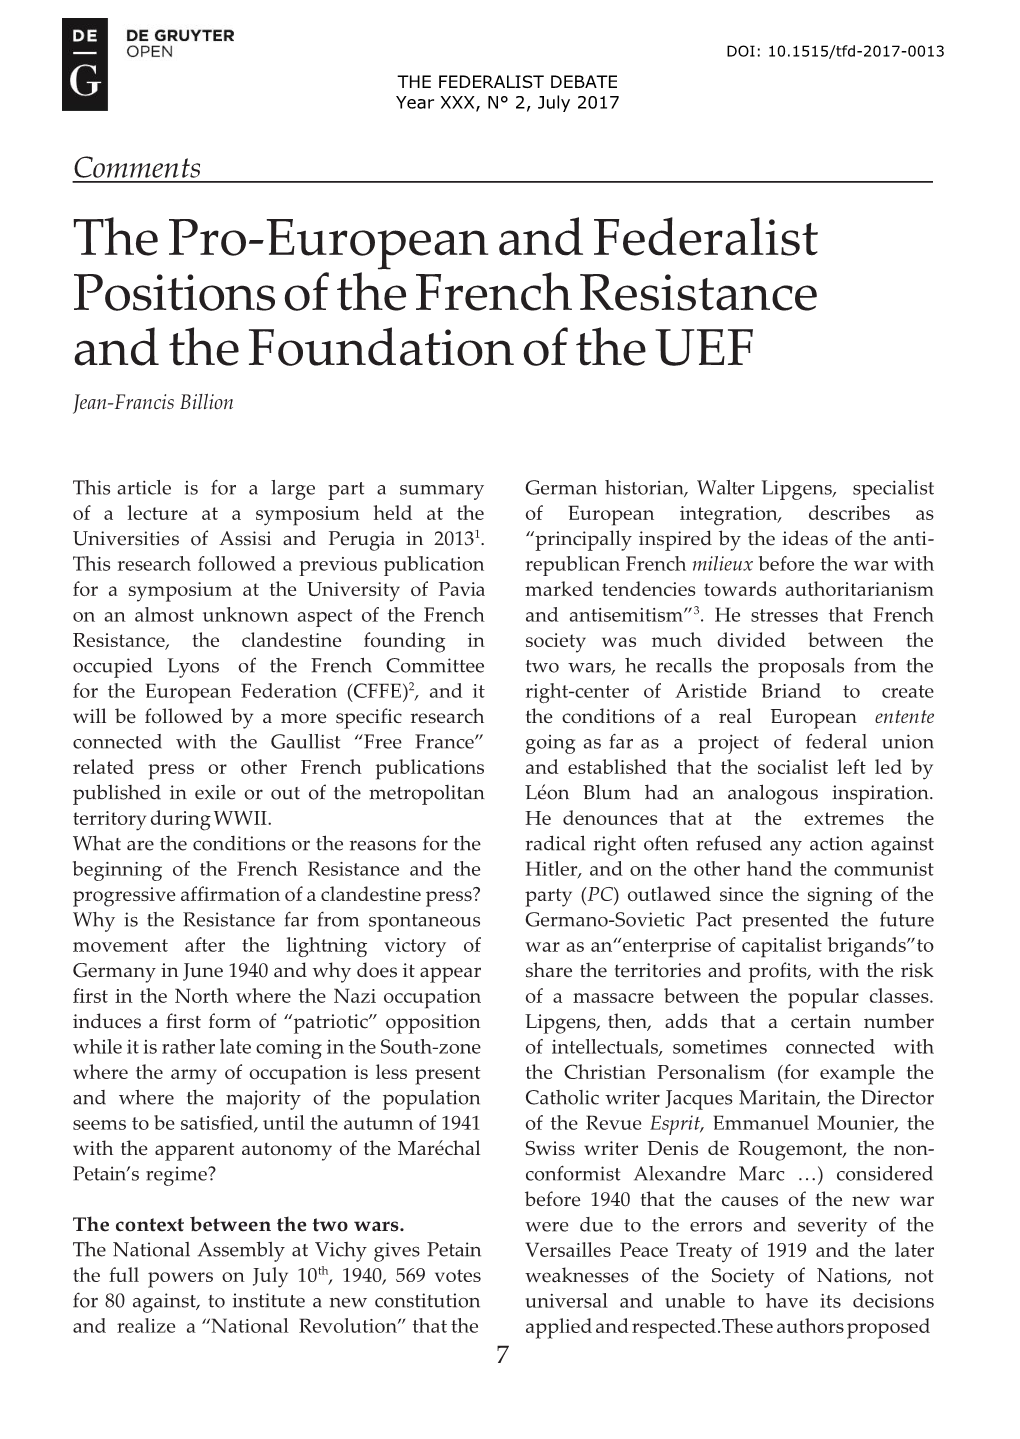 The Pro-European and Federalist Positions of the French Resistance and the Foundation of the UEF Jean-Francis Billion